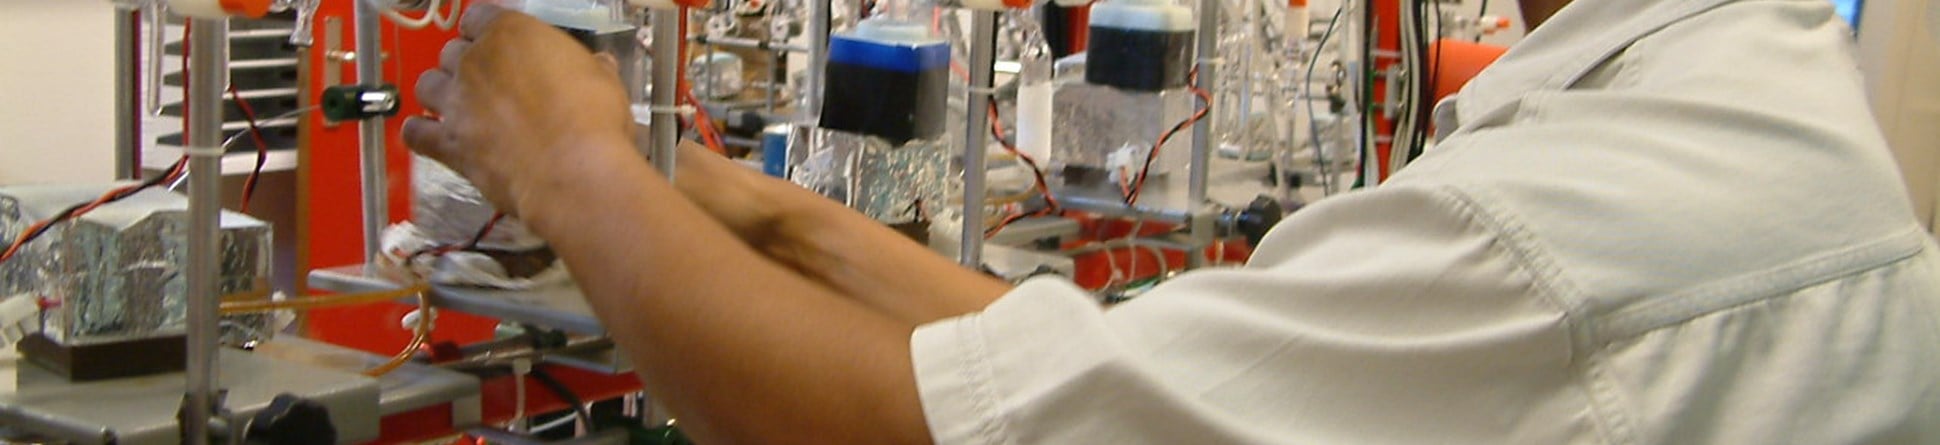 Scientist in laboratory preparing a sample for radiocarbon dating.